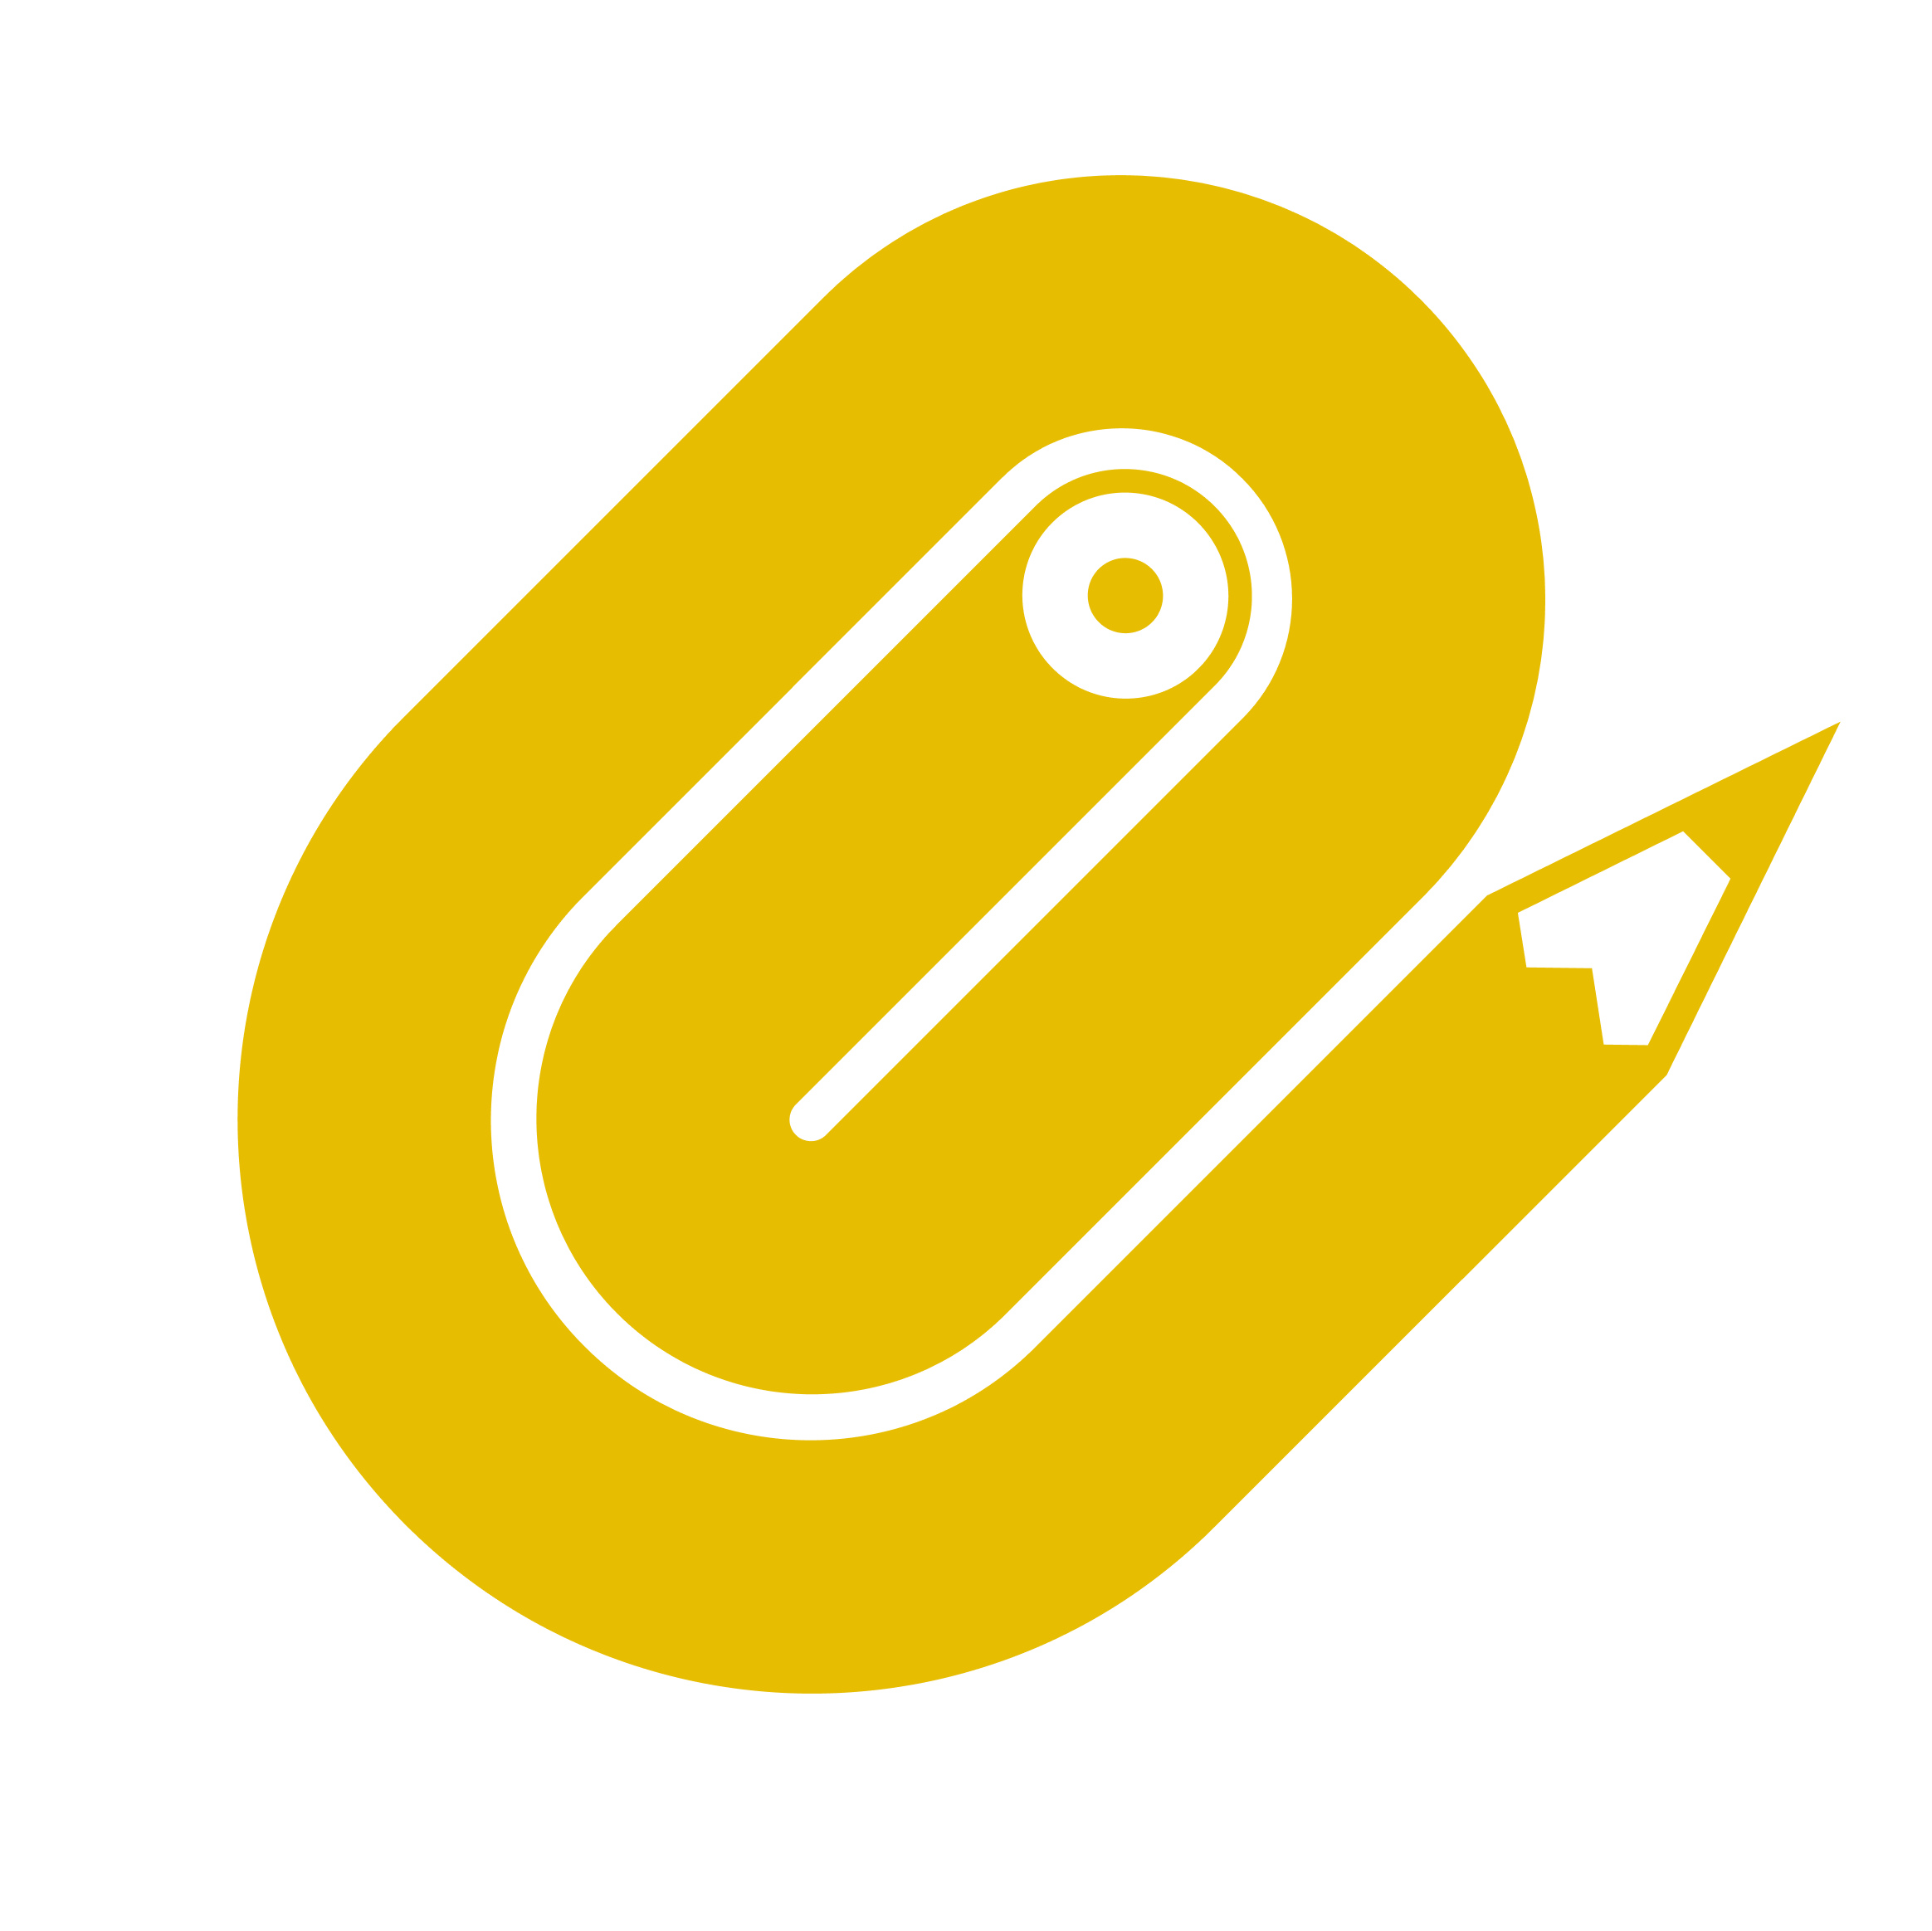 A vector image of a twisty yellow pencil on a transparent background.